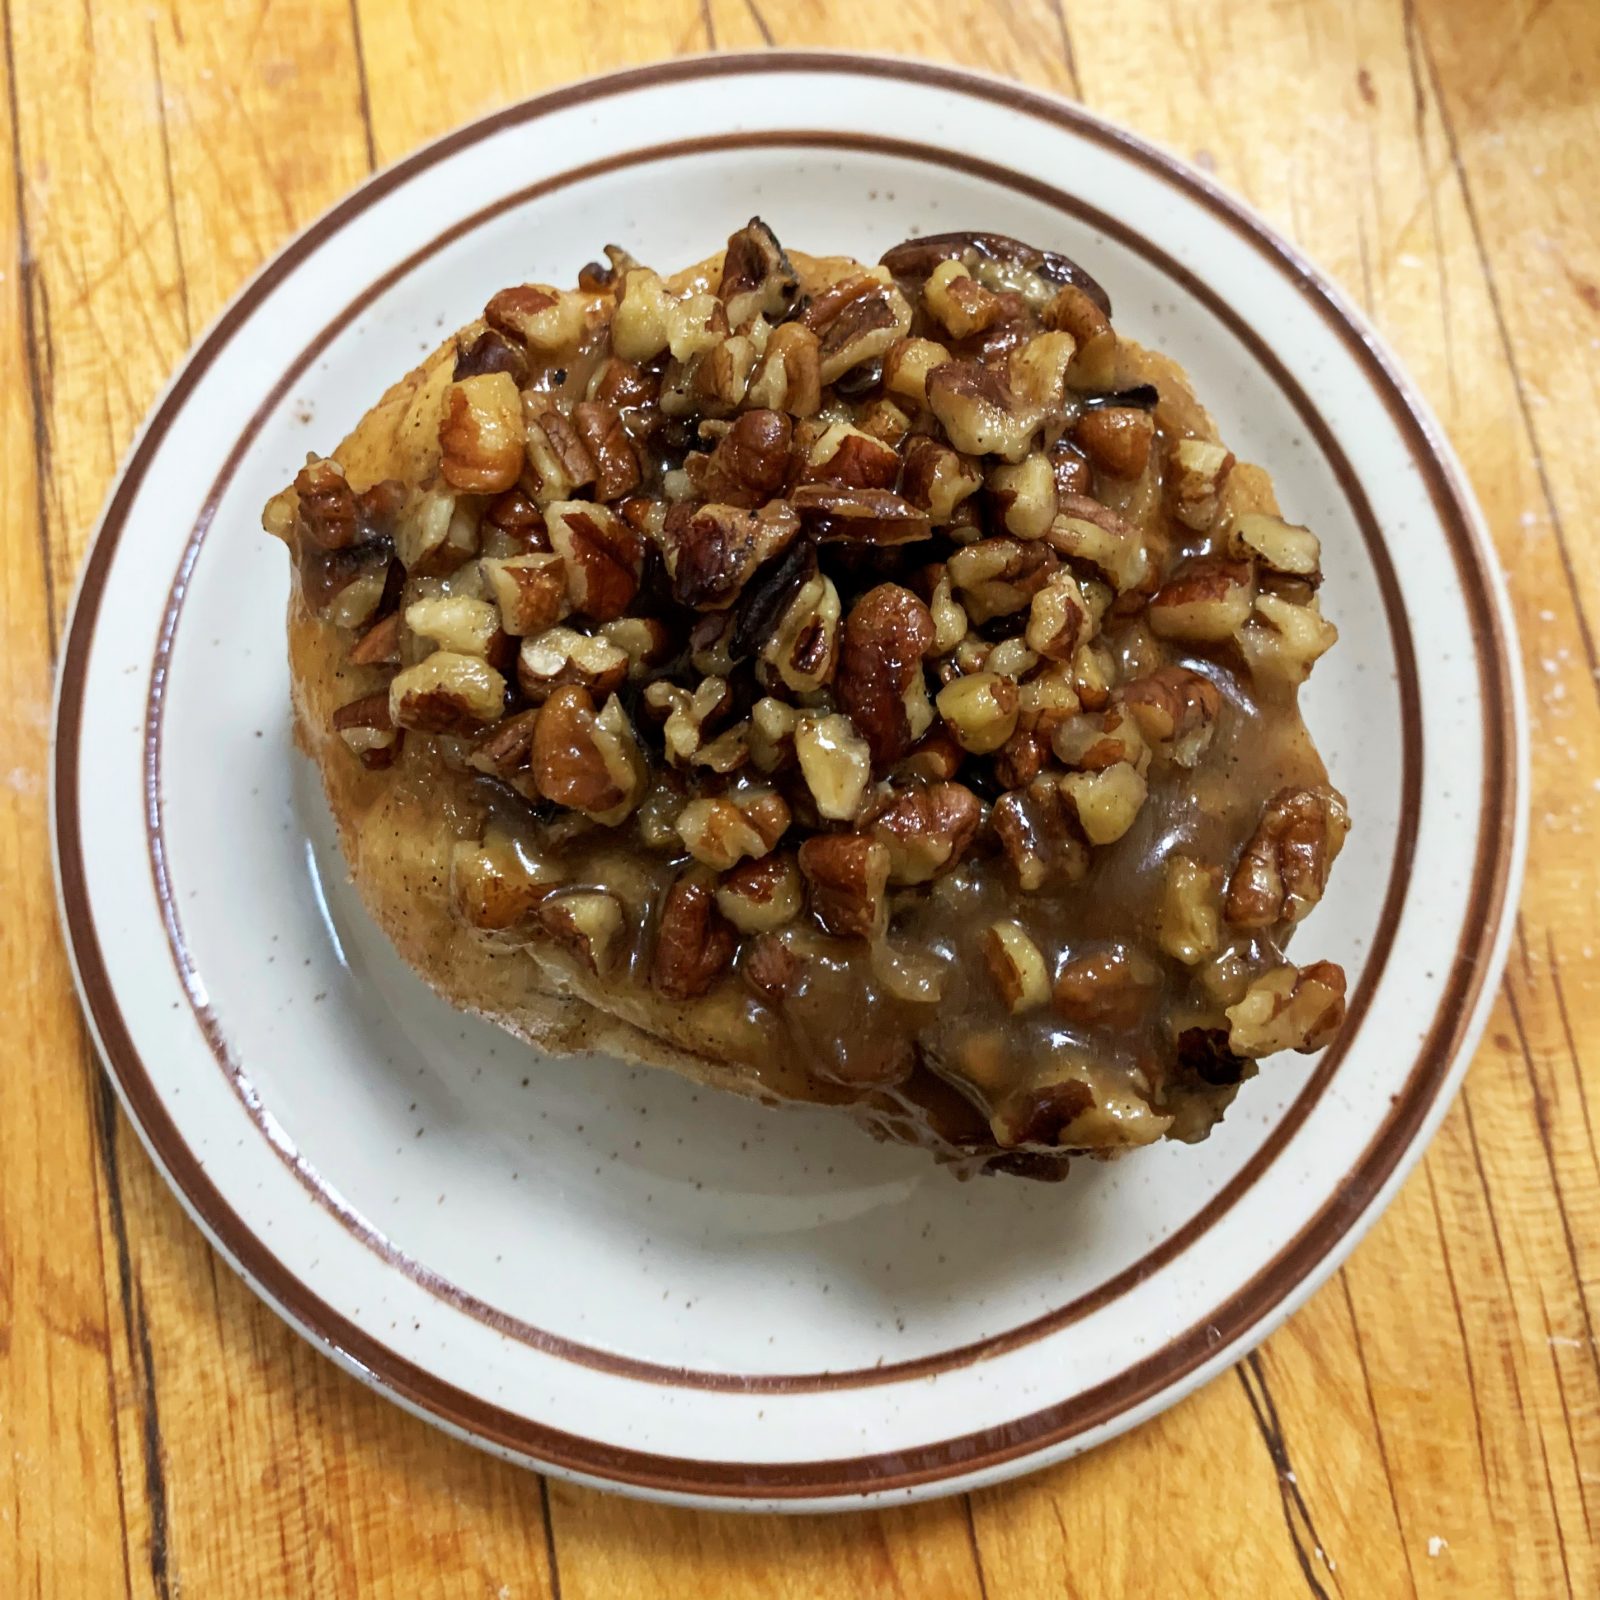 A plate with a cinnamon roll and pecans on it.